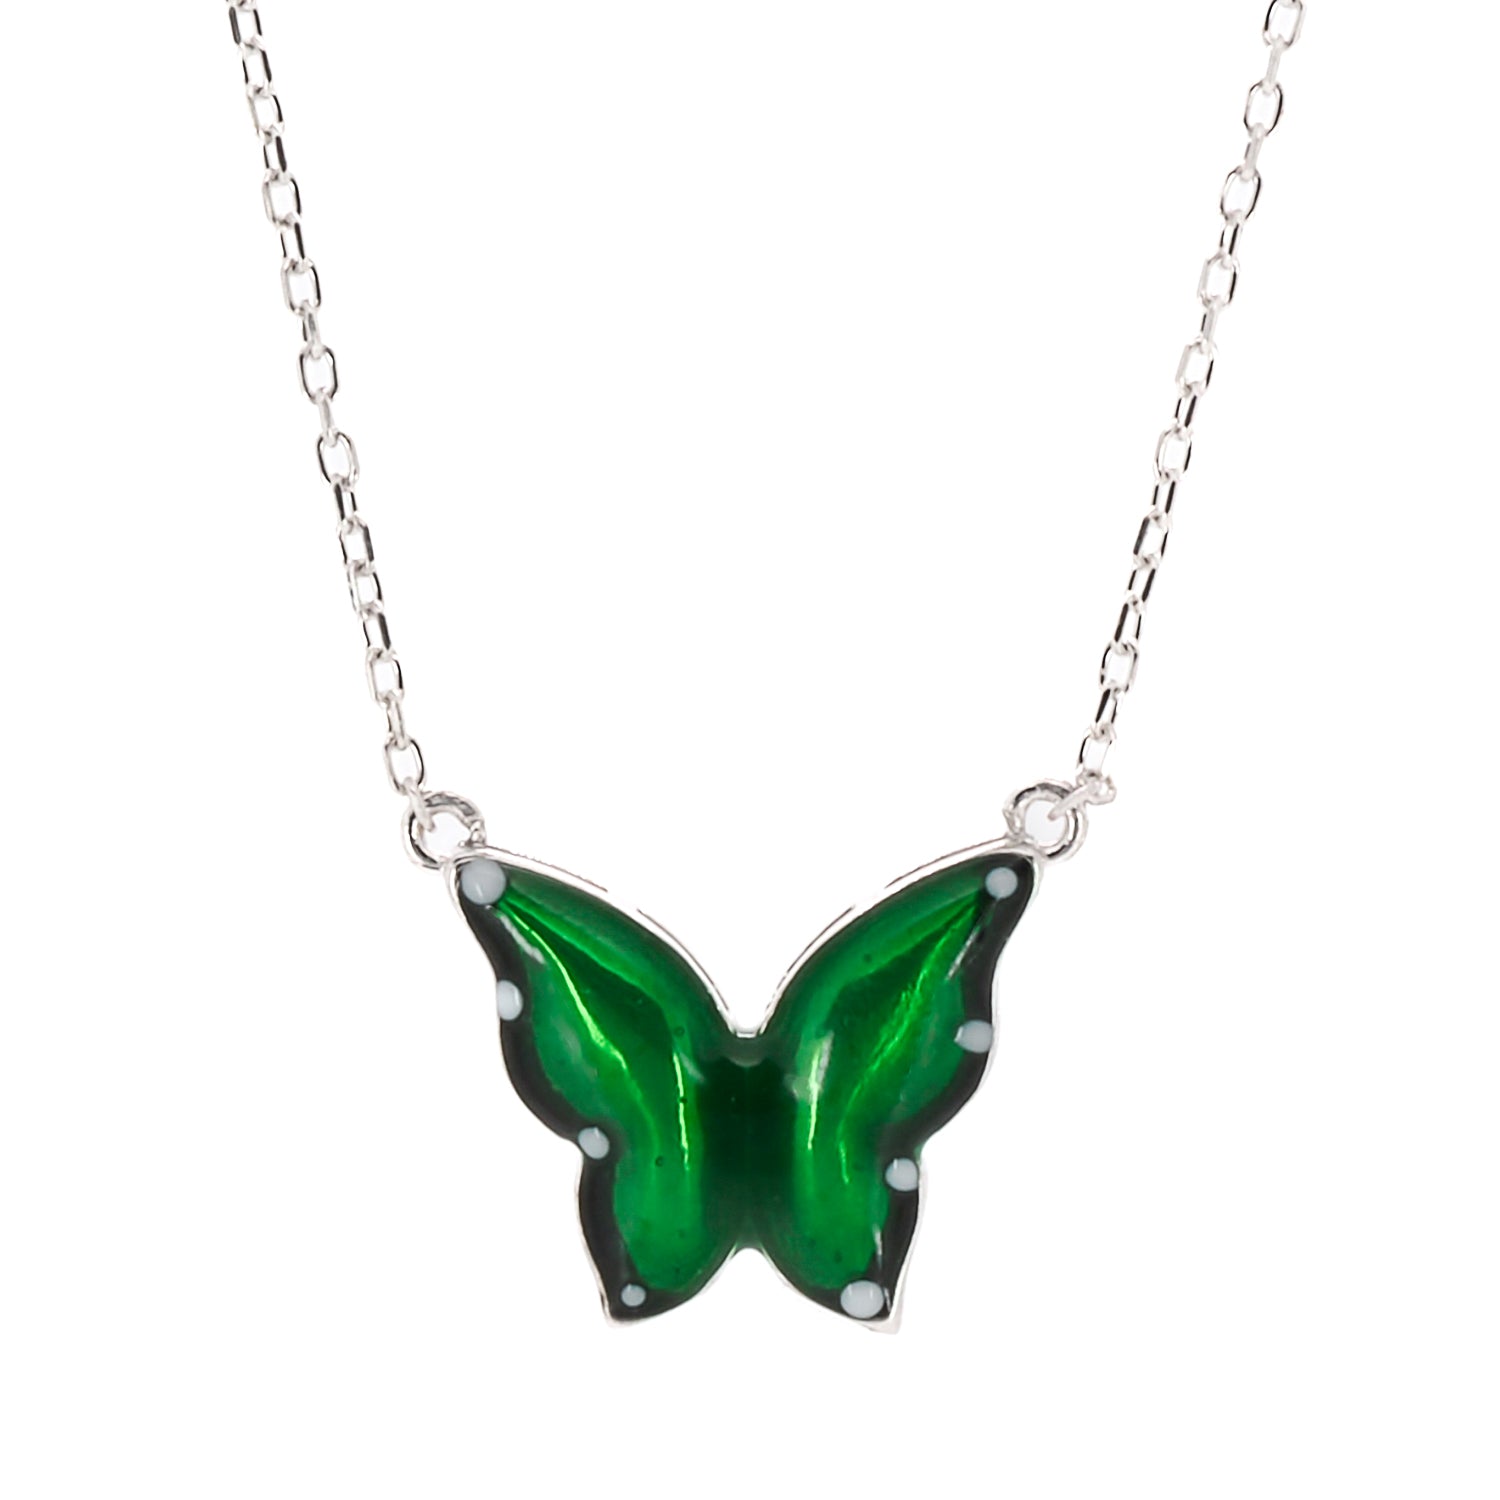 The Silver Abundance Green Enamel Butterfly Necklace, a symbol of transformation and inner growth.